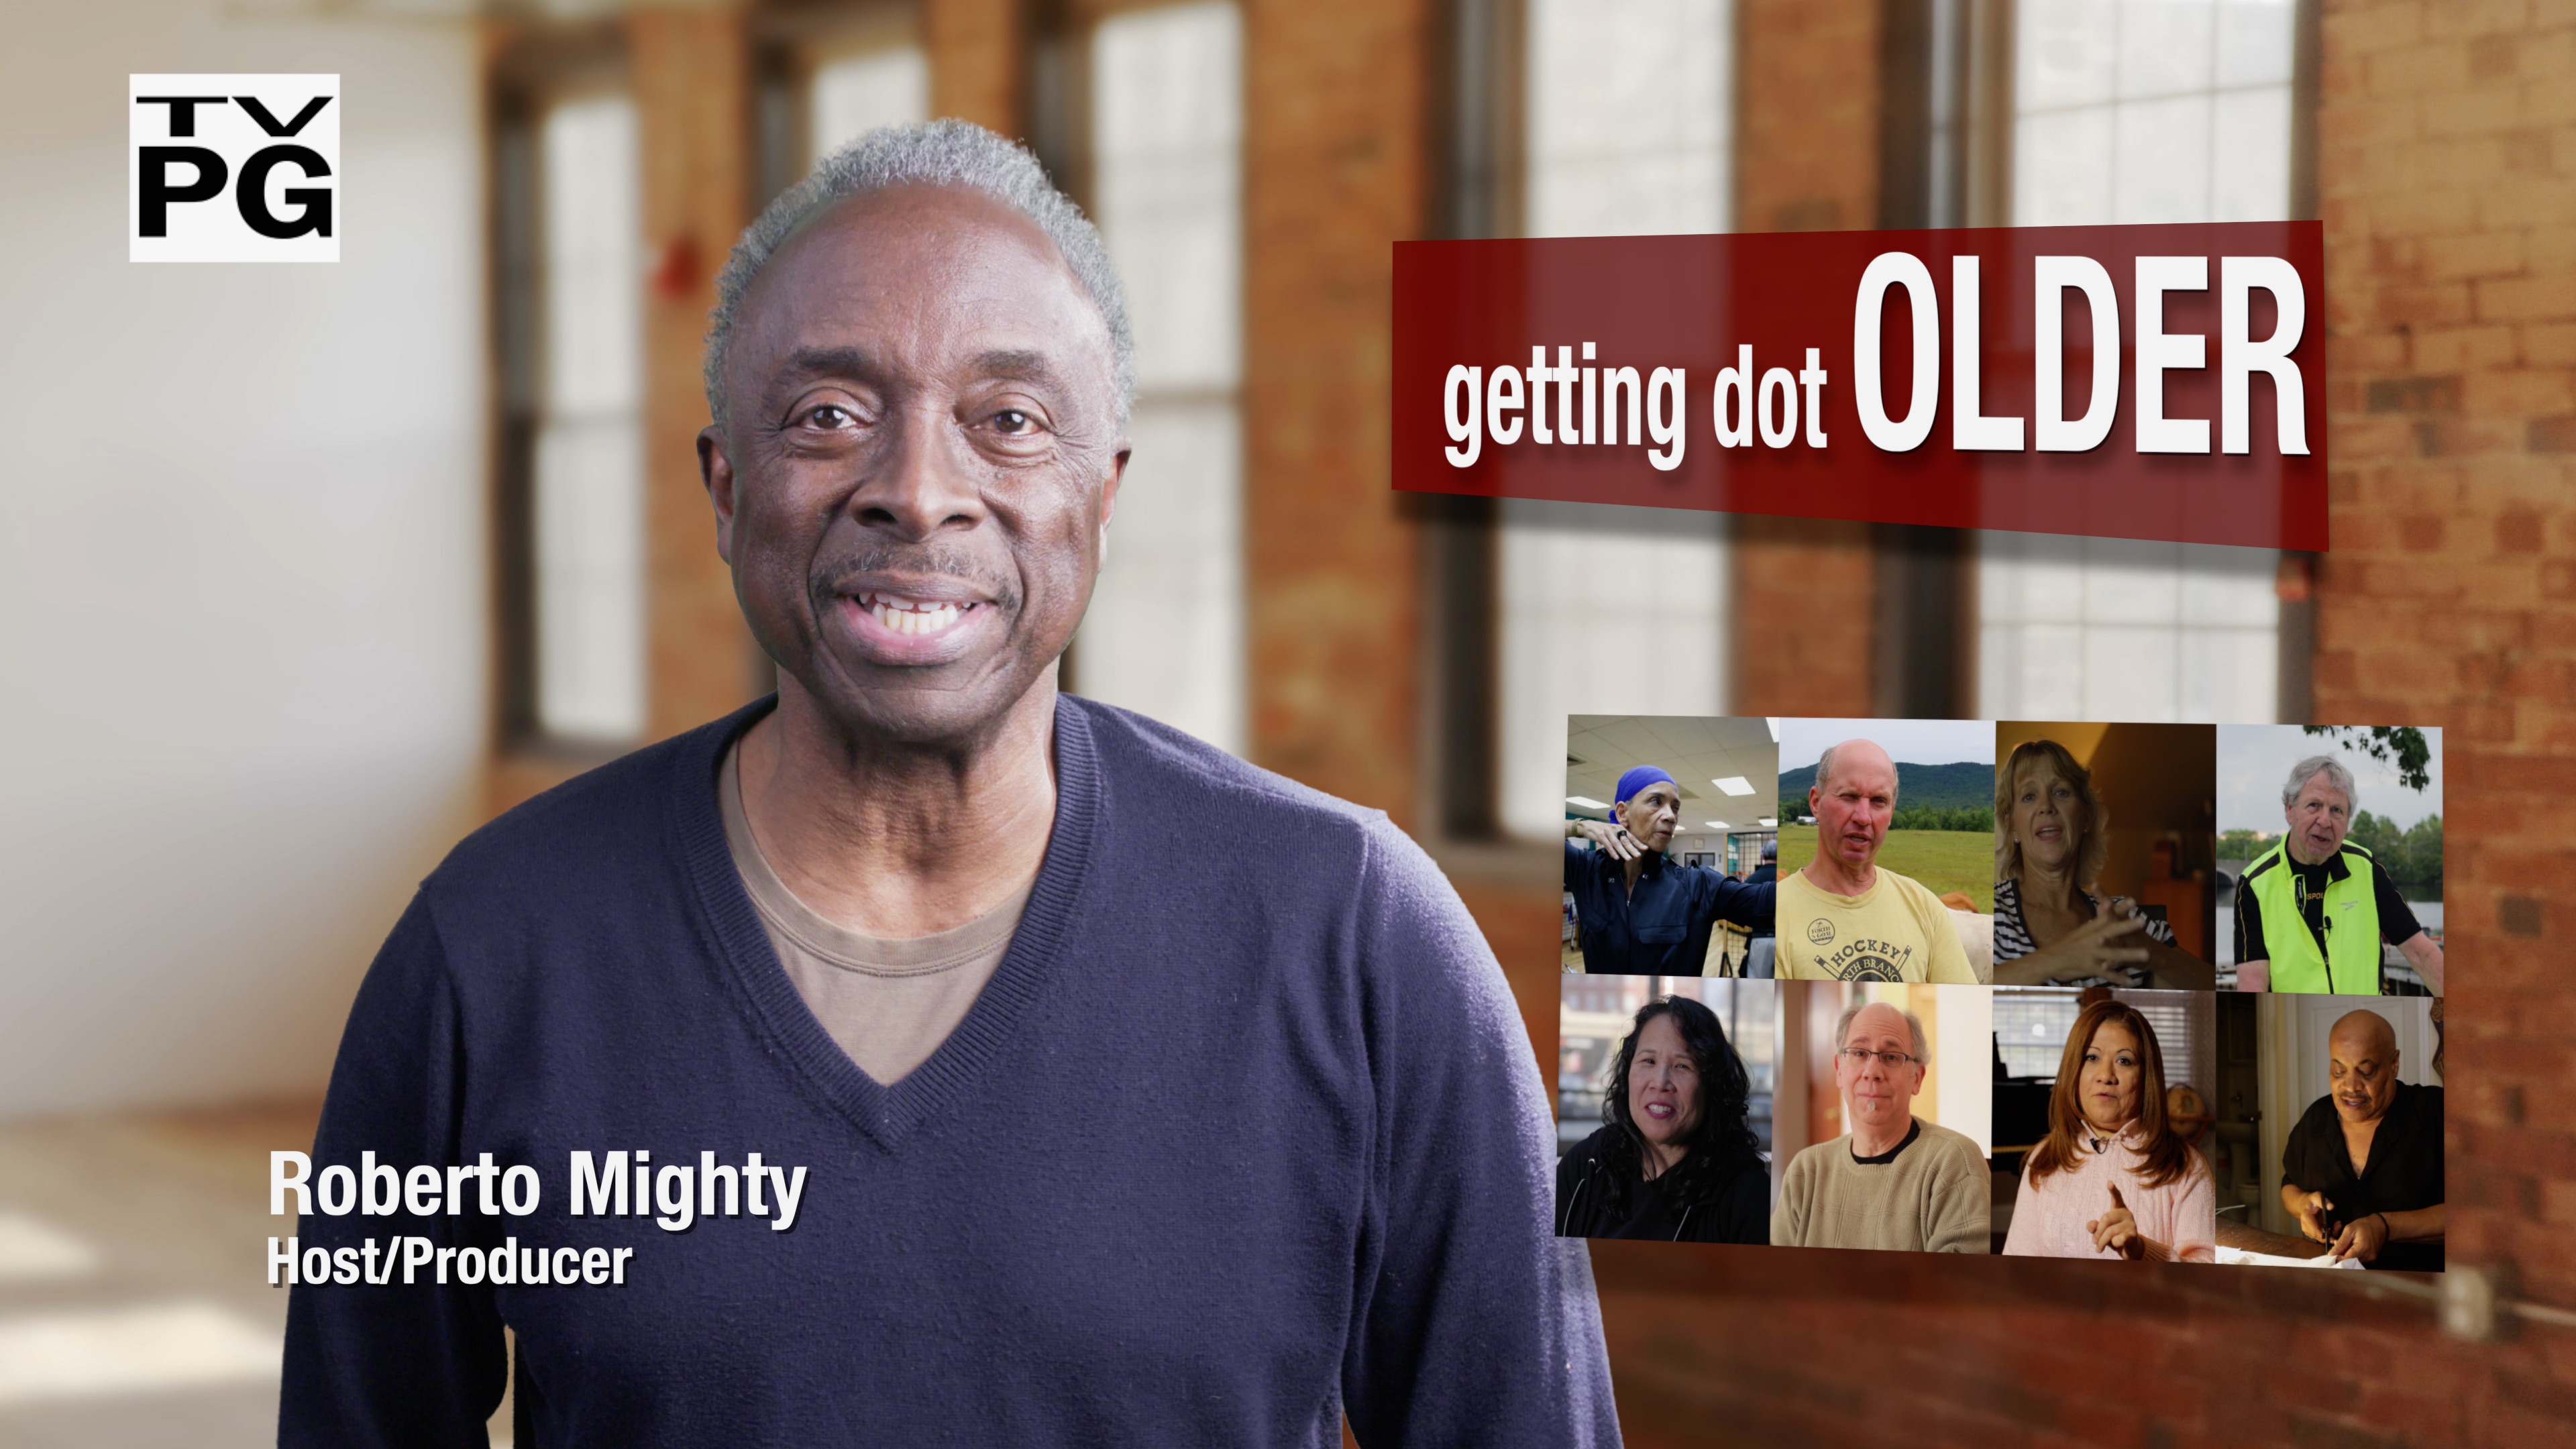 Poster for "getting dot OLDER", new public TV series produced by Celestial Media LLC and distributed by American Public Television. Release: January 1, 2022. Image: Host/Producer Roberto Mighty.